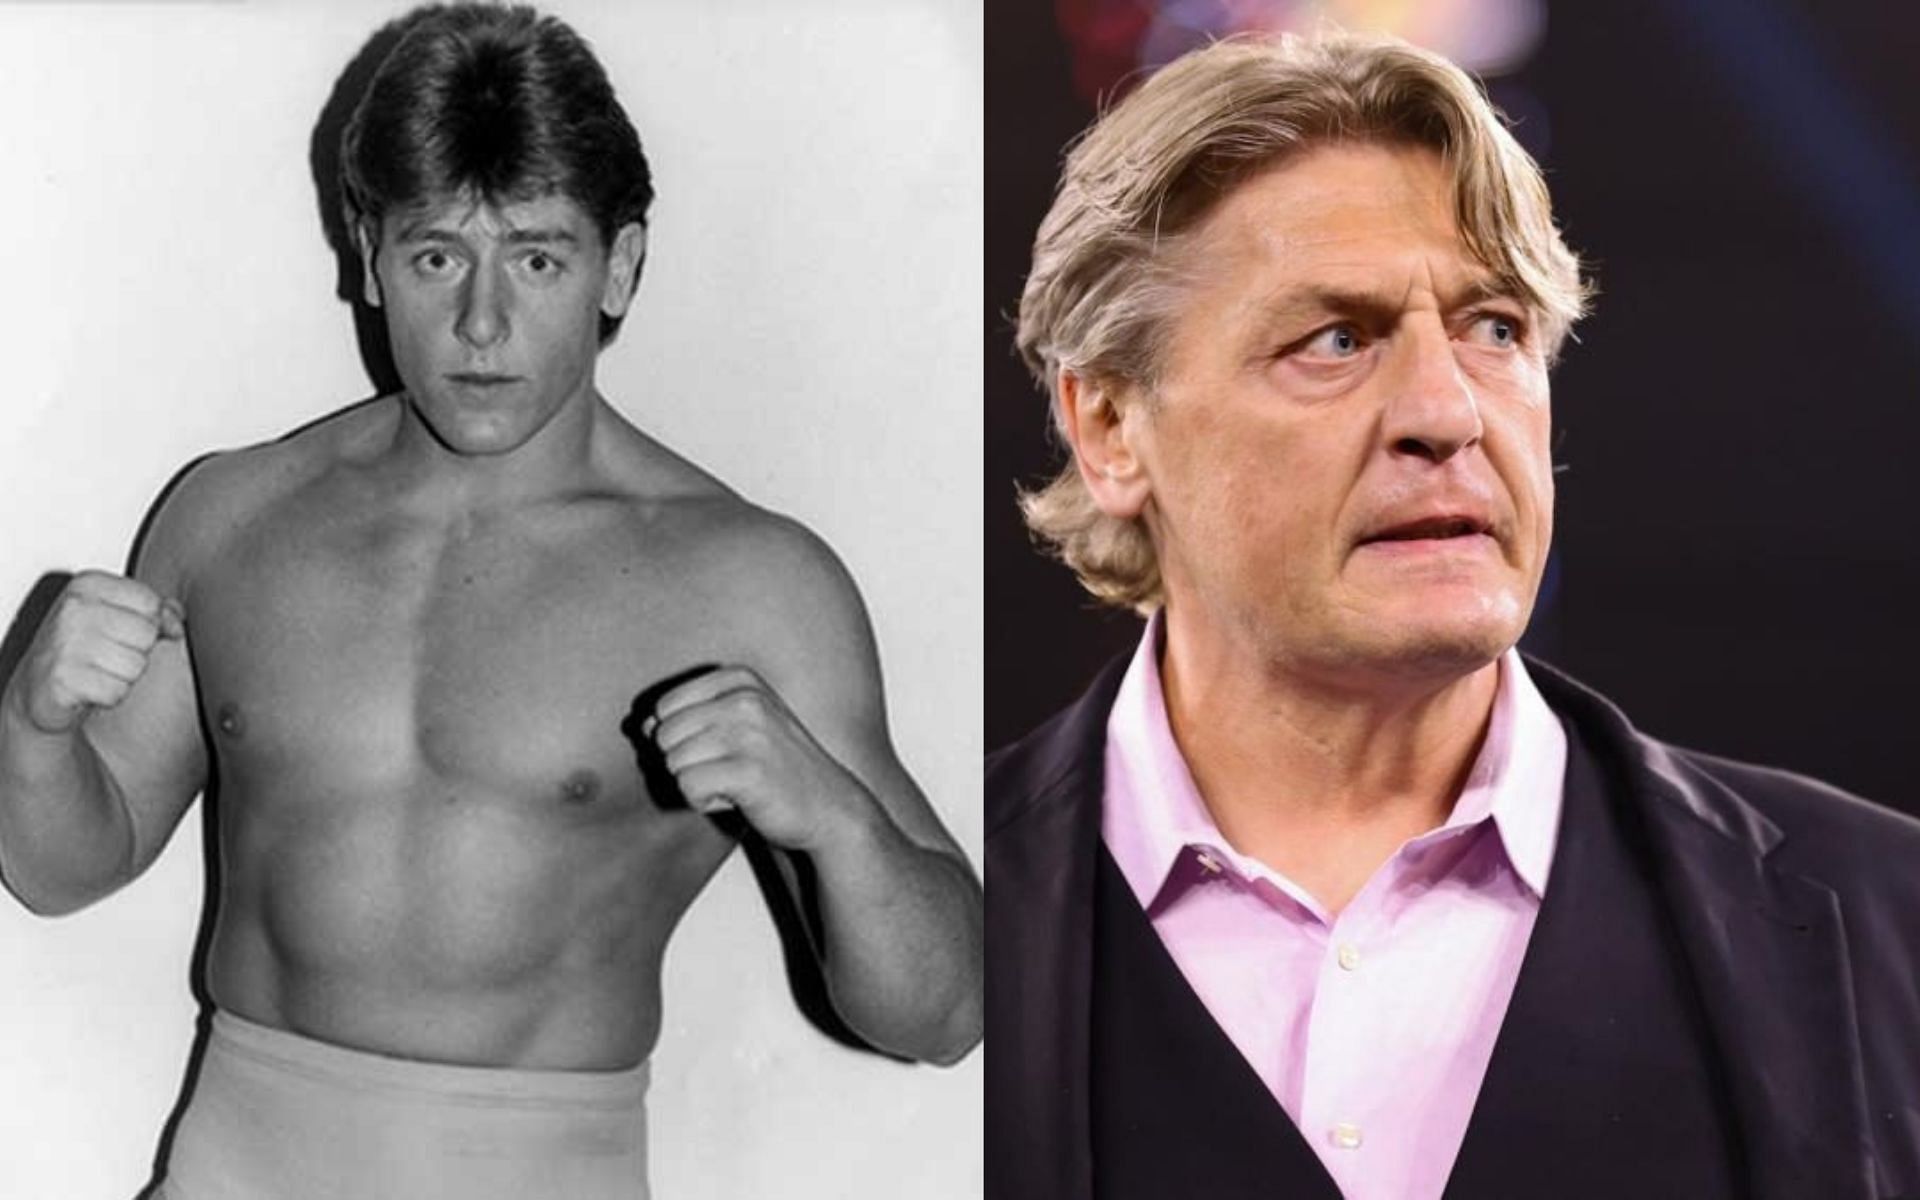 William Regal was associated with WWE for nearly two decades